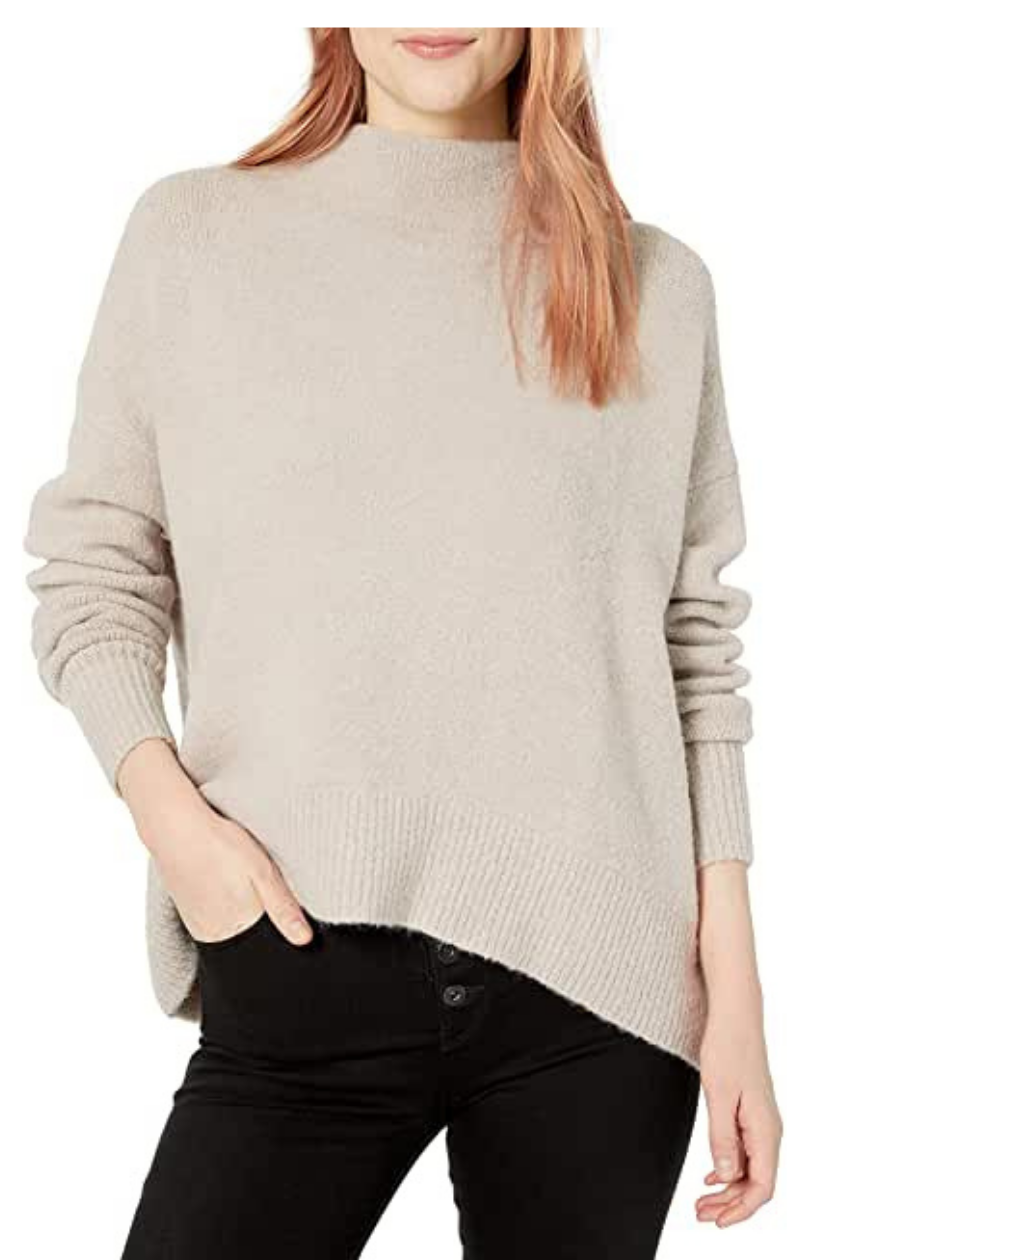 10 Best Amazon Prime Fall Sweaters